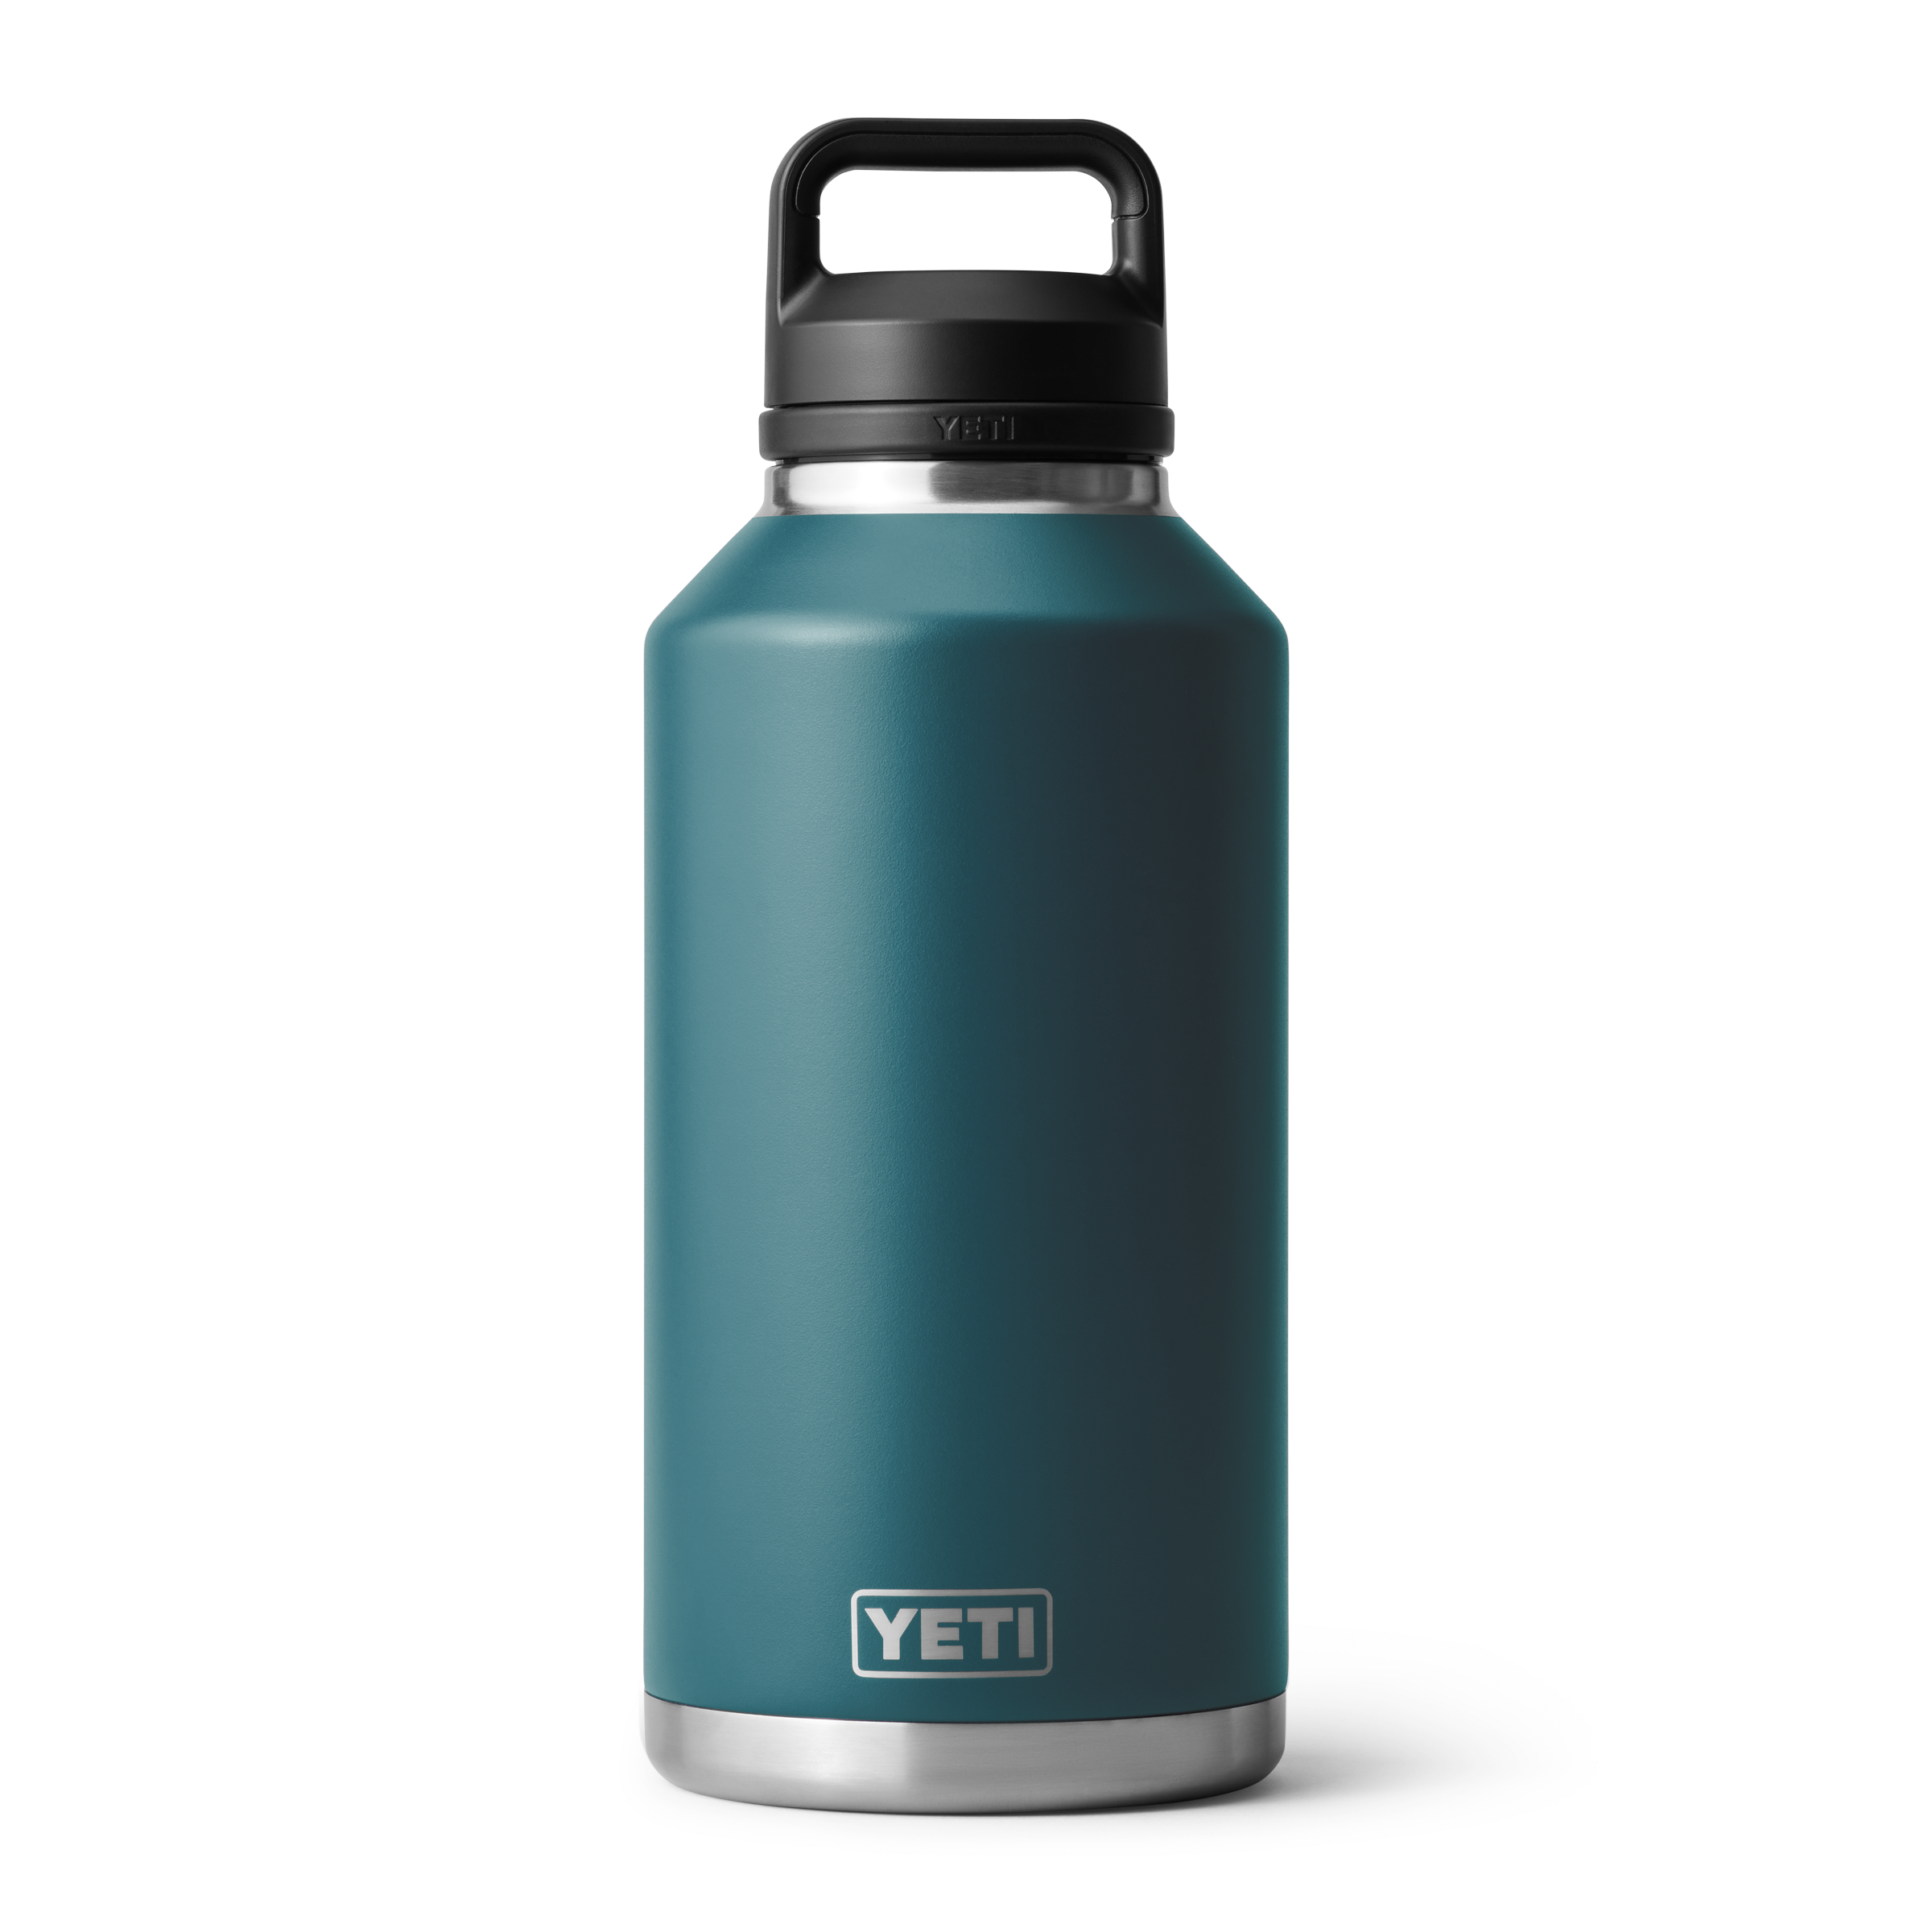 Yeti 64oz Bottle With Chug Cap - 64OZ / AGAVE TEAL - Mansfield Hunting & Fishing - Products to prepare for Corona Virus